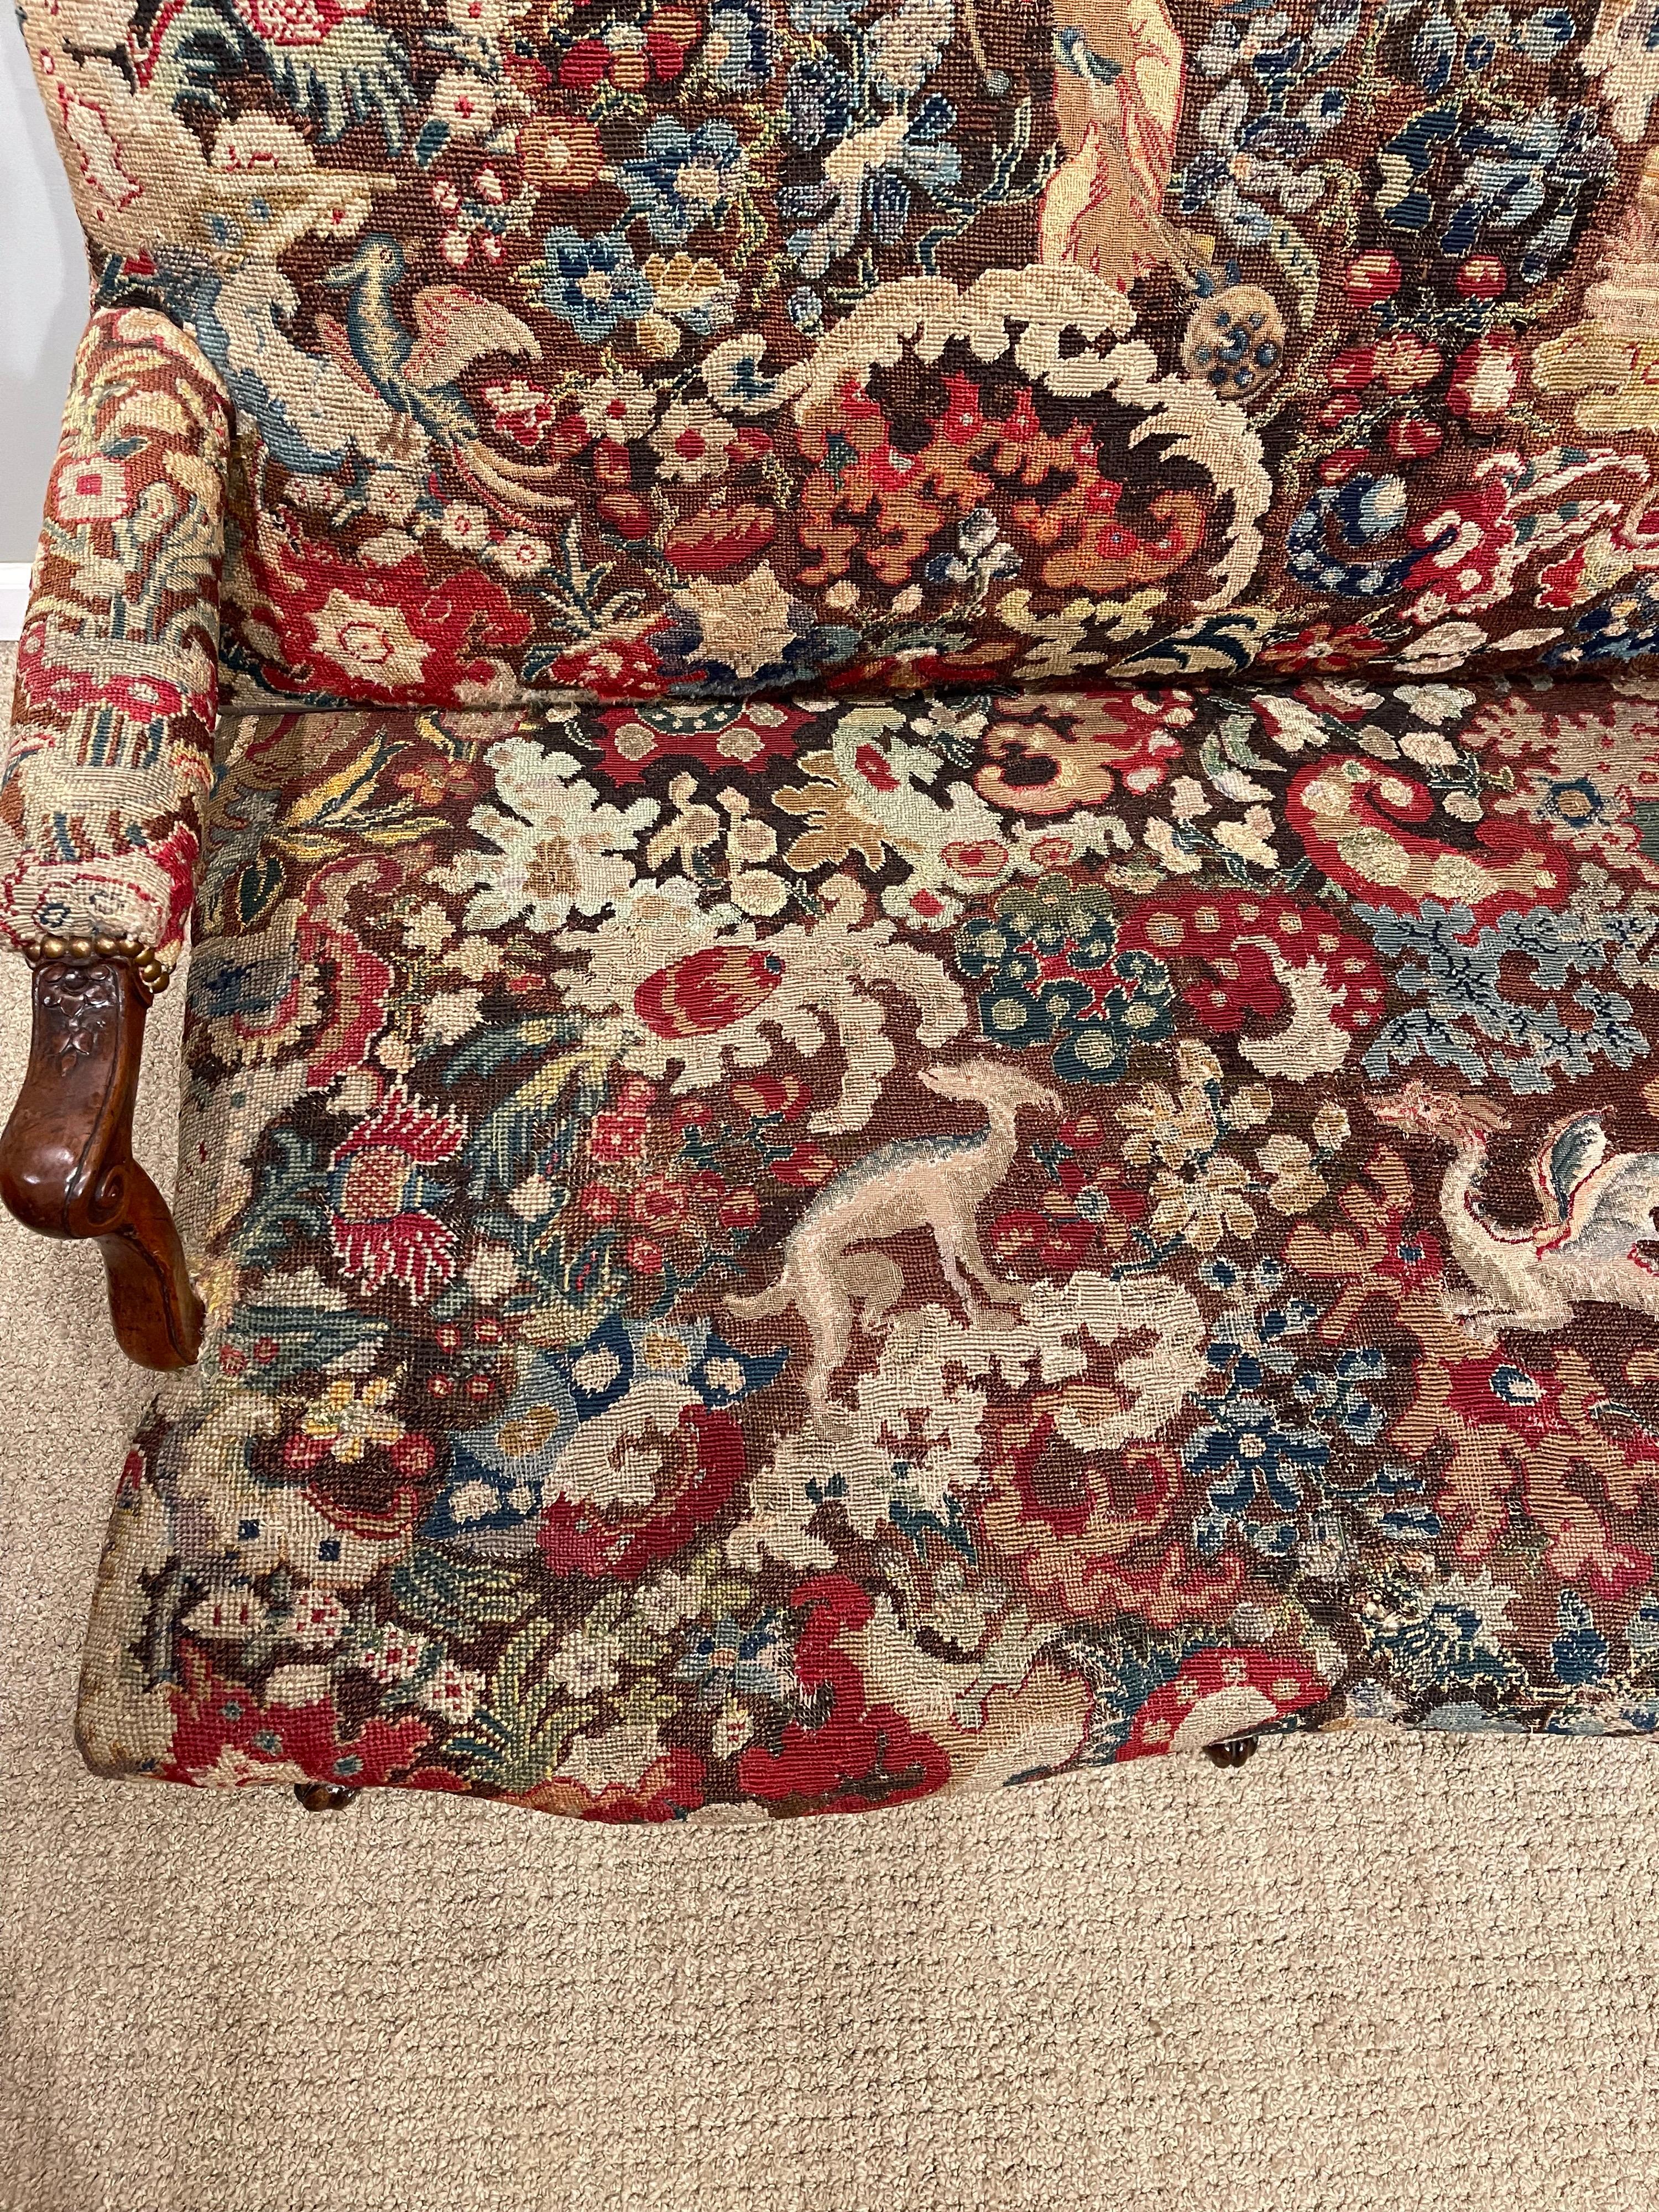 Régence Period Needlepoint Covered Settee 8